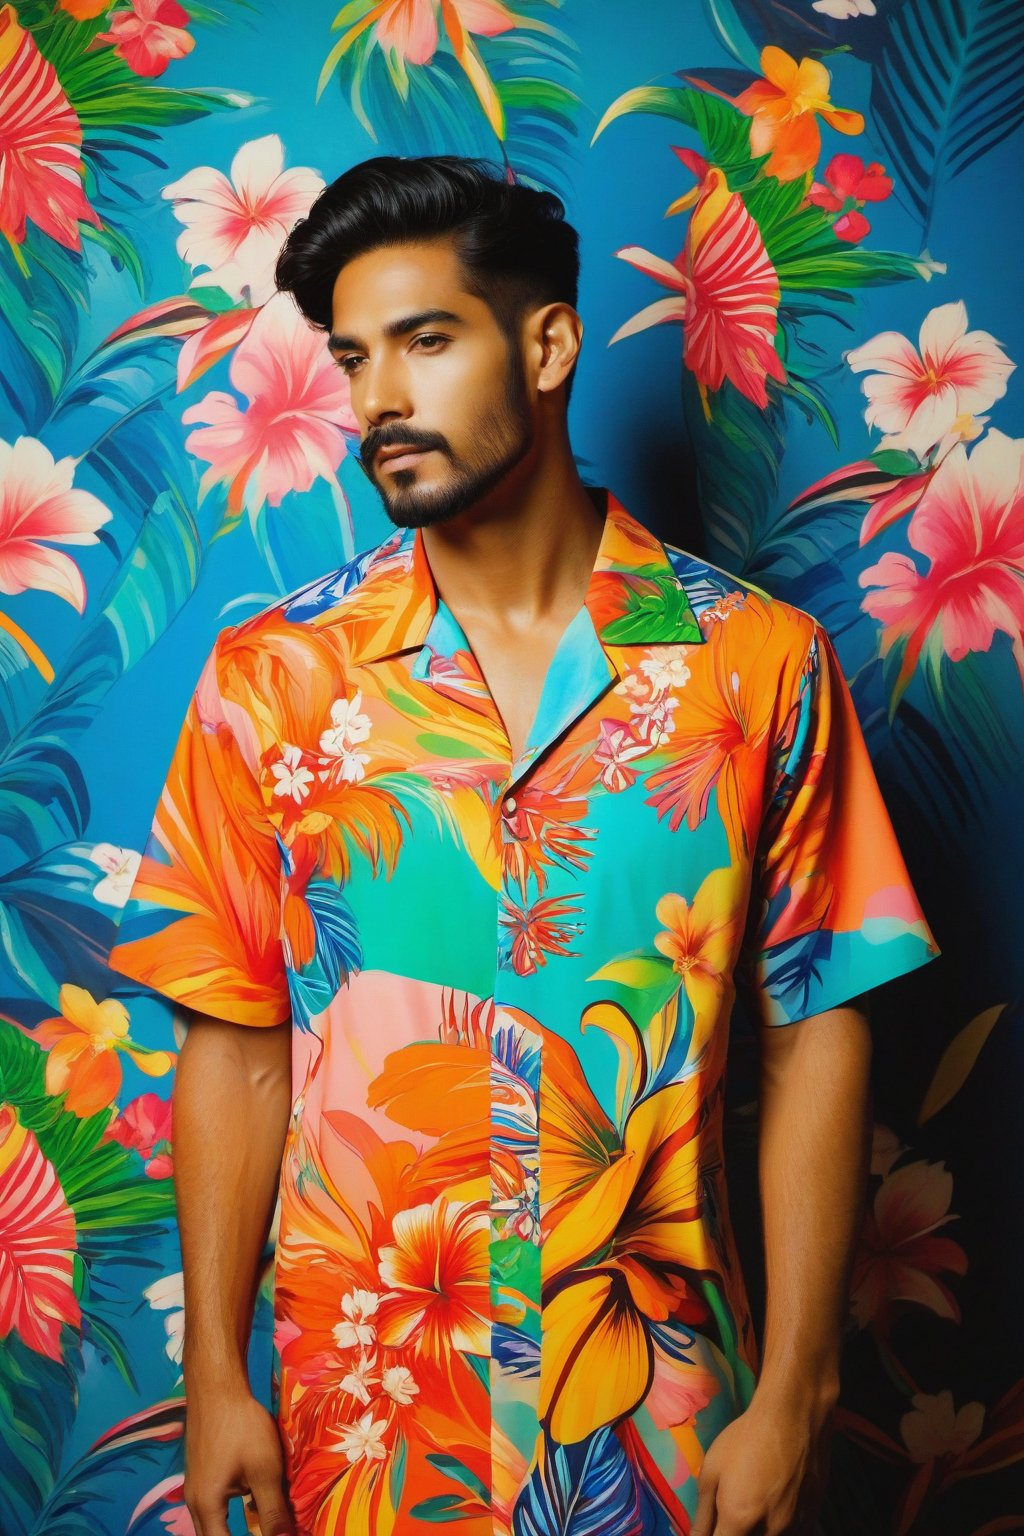 Man in a colorful dress posing for a picture, a portrait inspired by Eva Gonzalès, tumblr, art nouveau, elegant tropical prints, floral art novuea dress, wearing a hawaiian dress, flower dress, boy with glowing flowers dress, floral clothes, graphic print, flowery dress, dressed in a flower dress, shirt, colorful dress